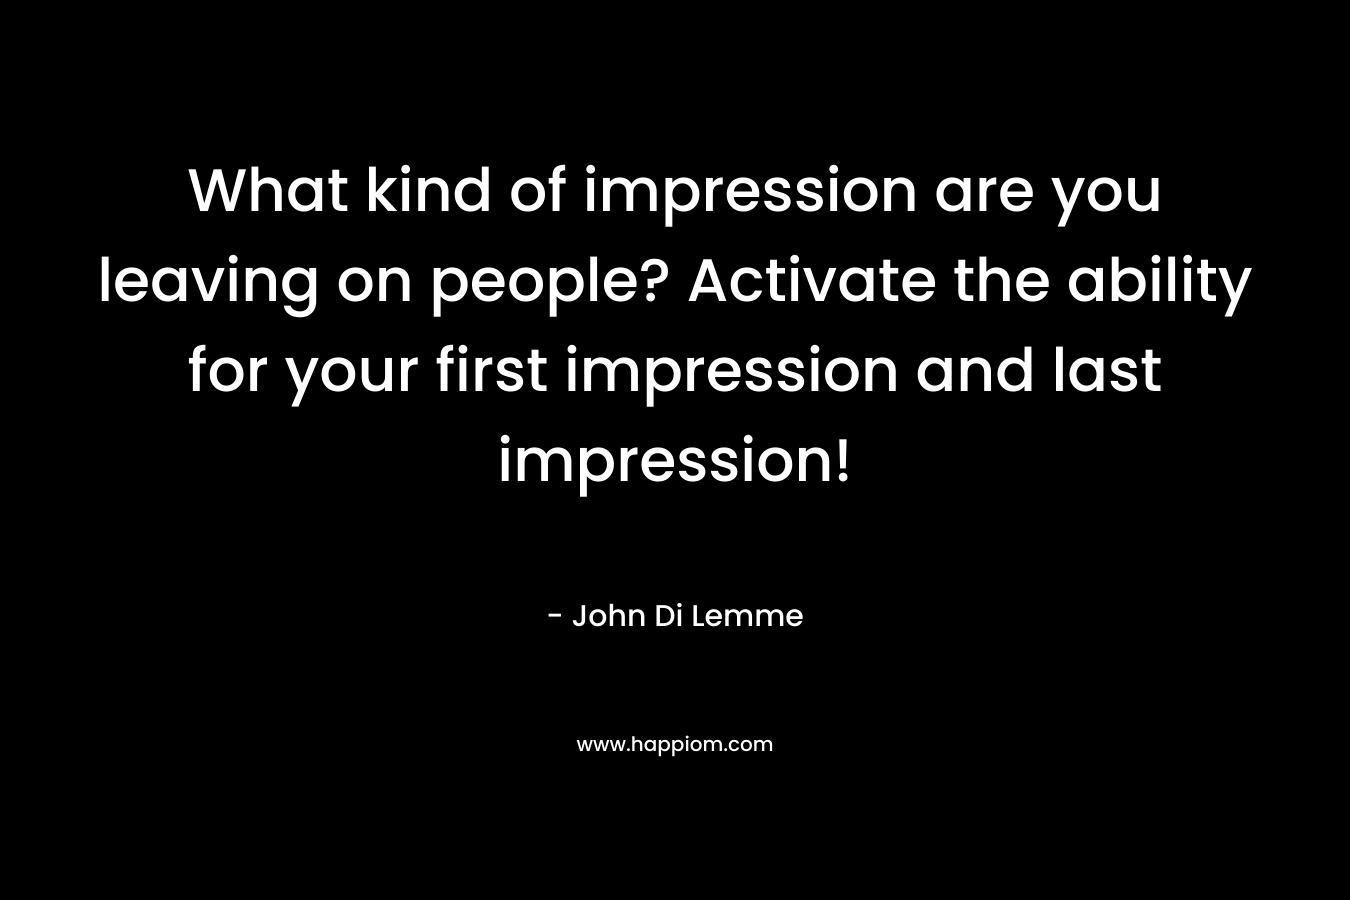 What kind of impression are you leaving on people? Activate the ability for your first impression and last impression! – John Di Lemme